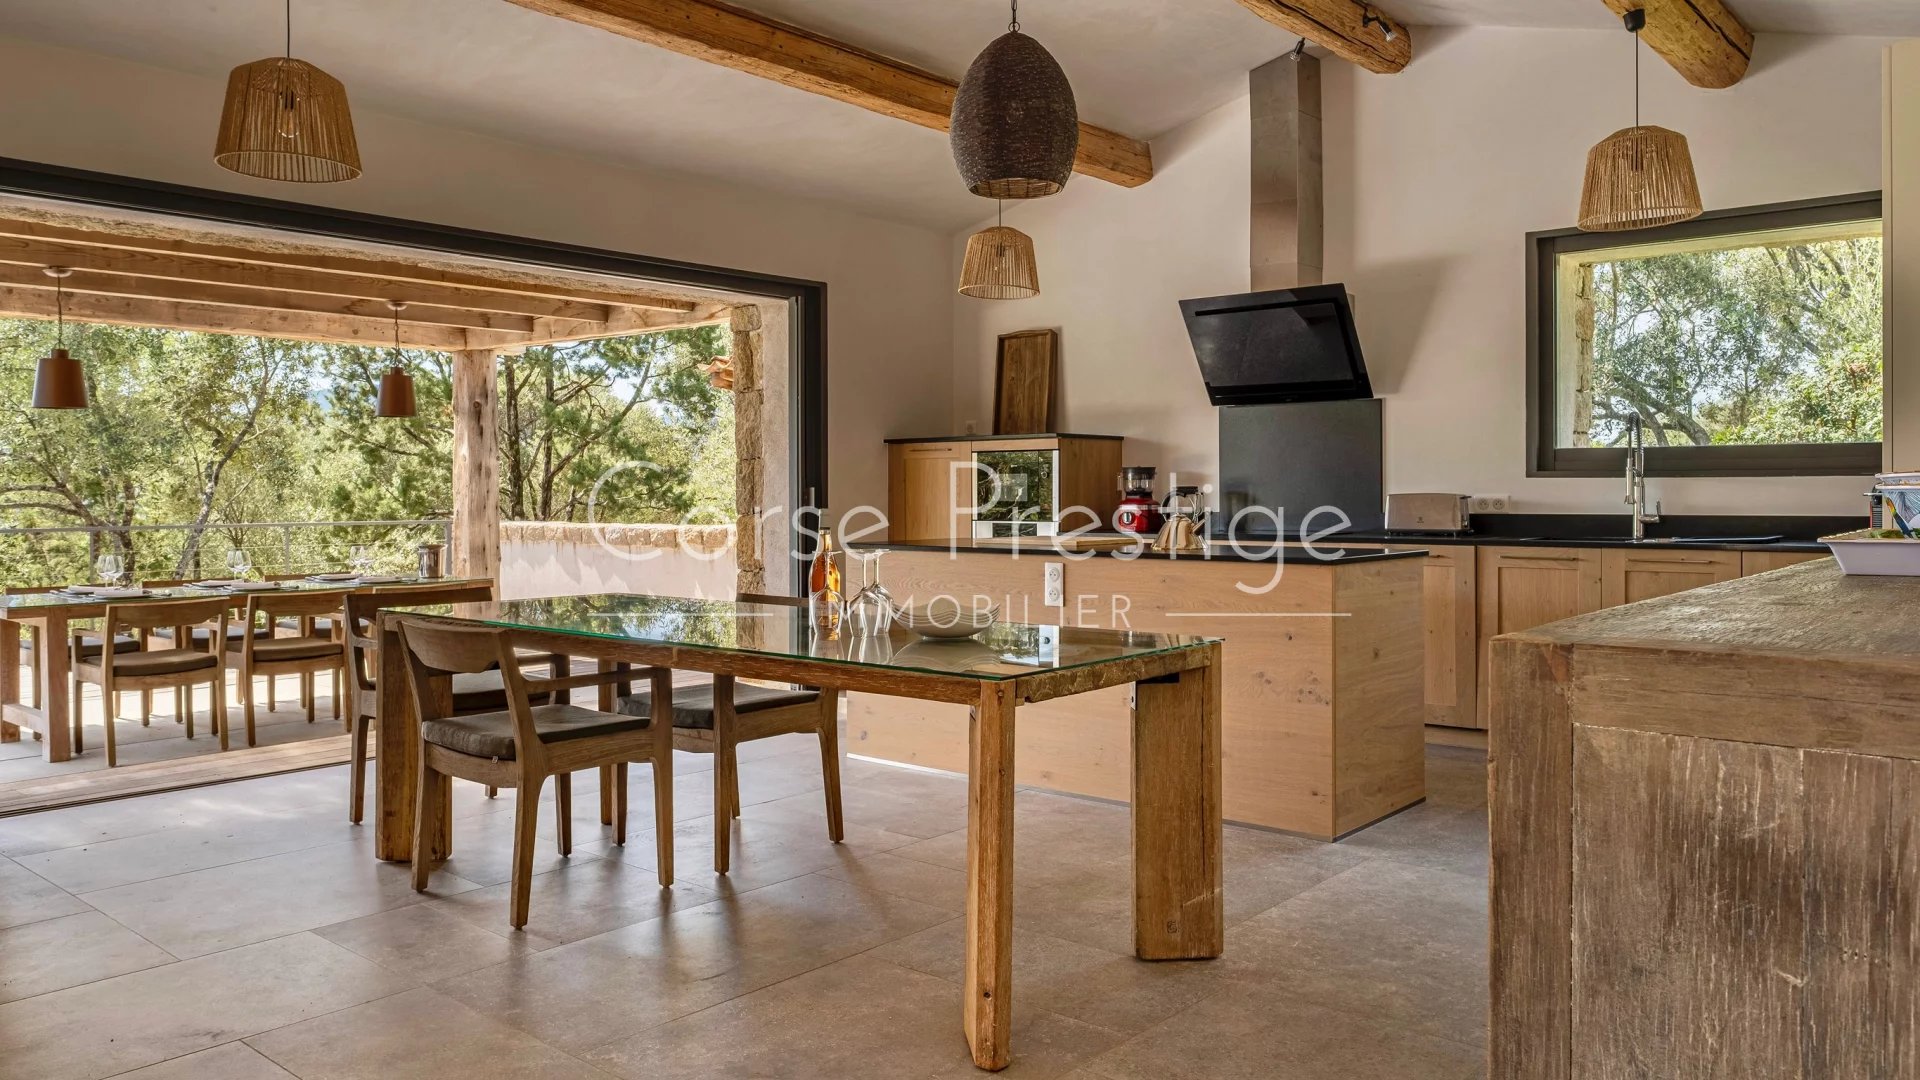 corsican farmhouse for rent by the sea image4